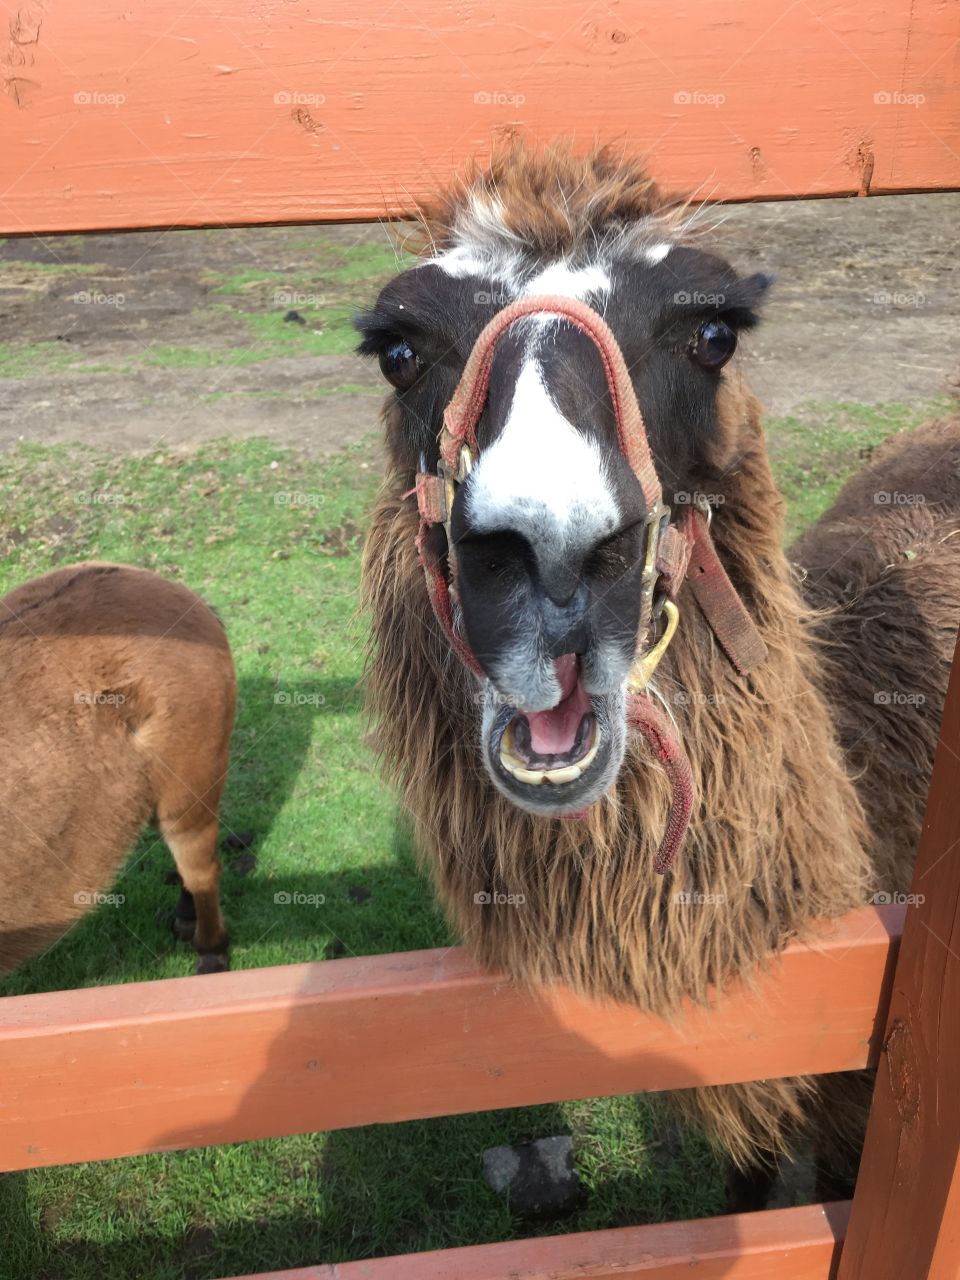 Llama at a petting zoo. Seems to be chewing, but did not spit on me. Harness on its face. Donkey butt is in the background.